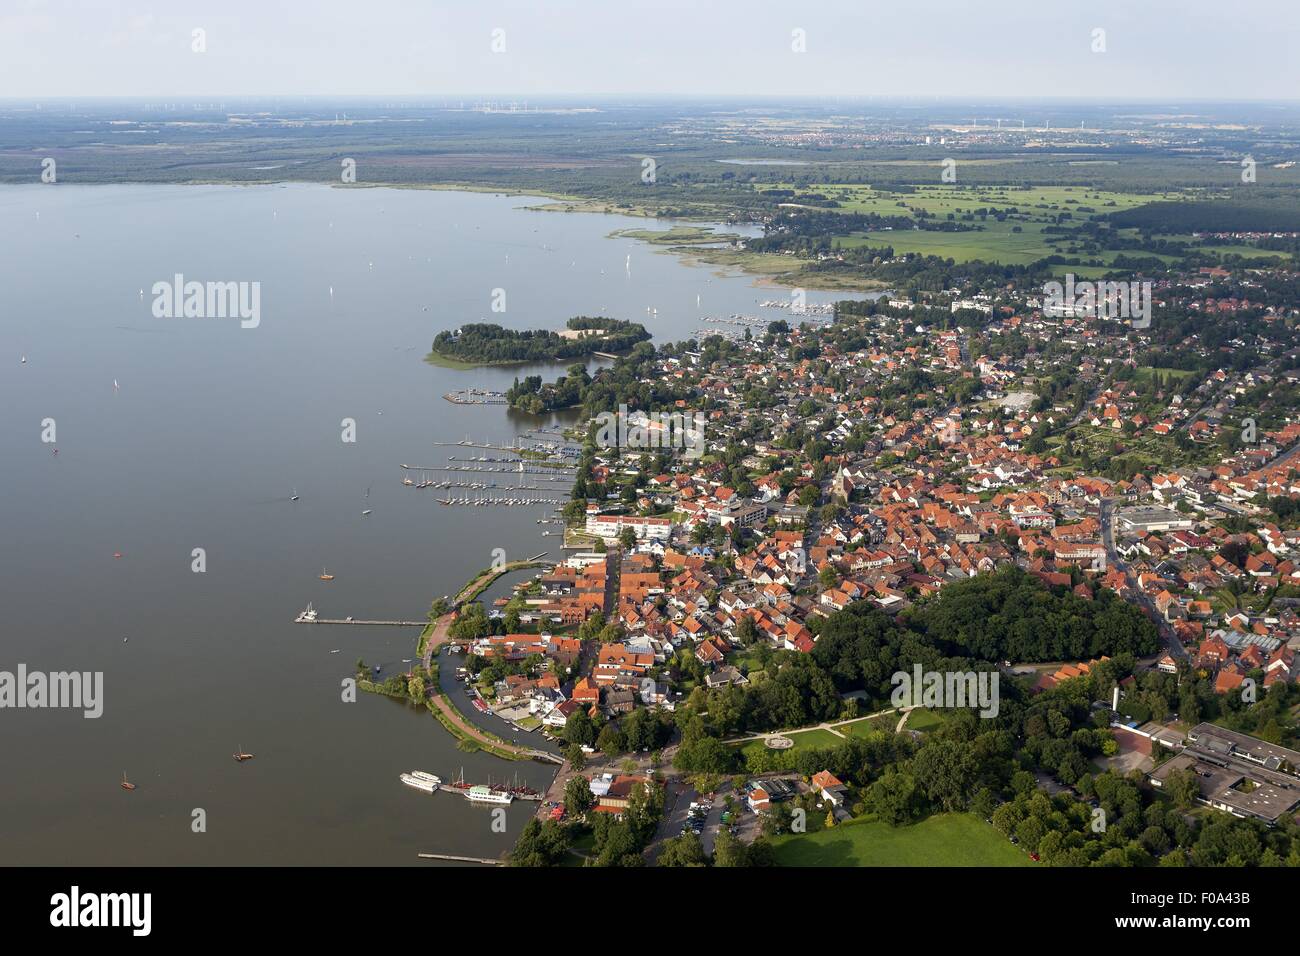 City view of Steinhude, Hanover, aerial view Stock Photo